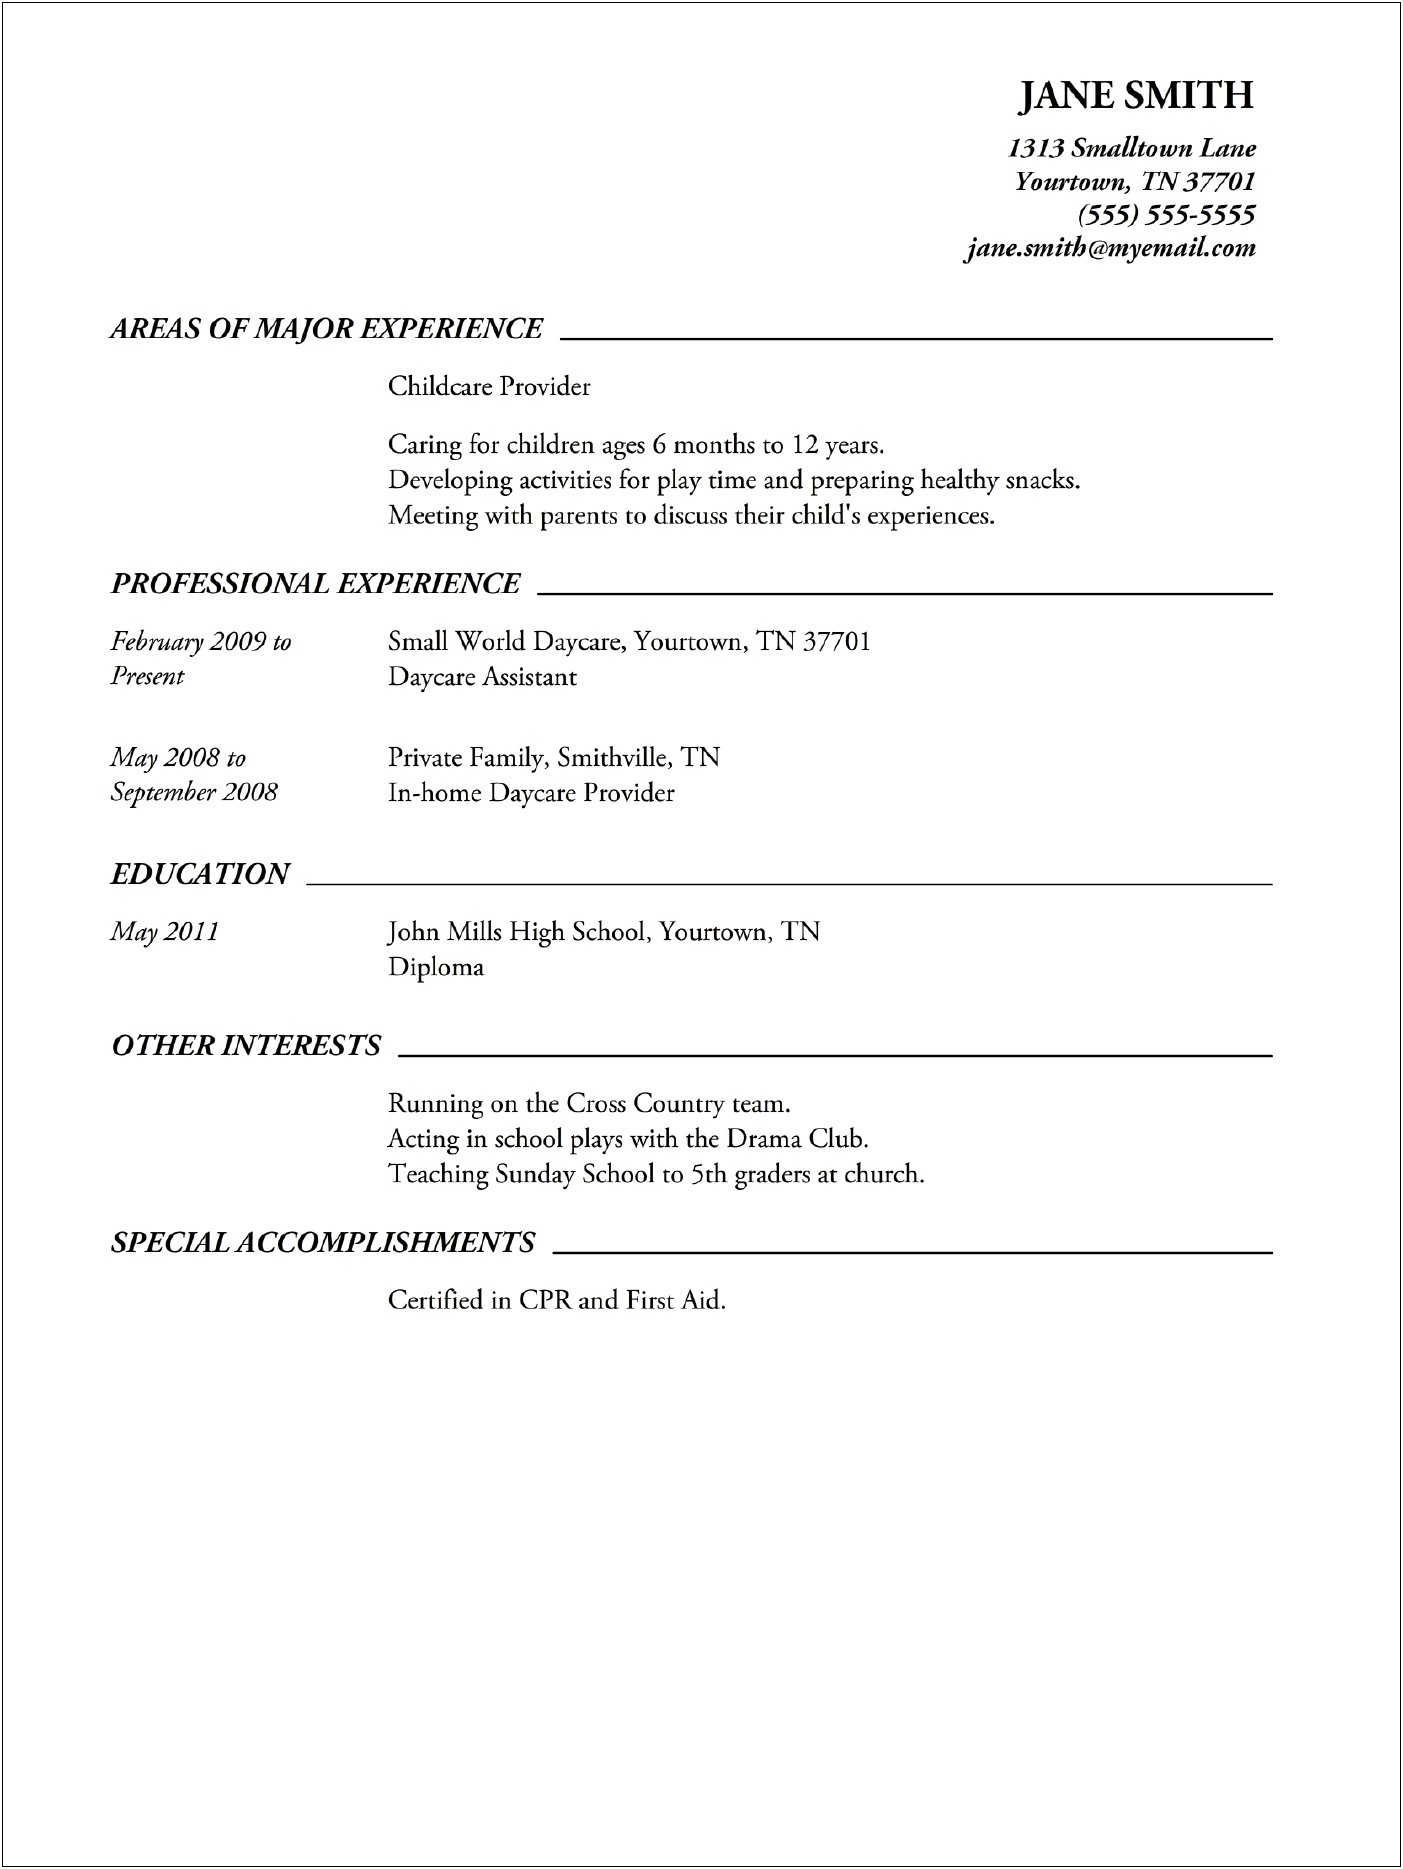 Resume Expamples For High School Graduate